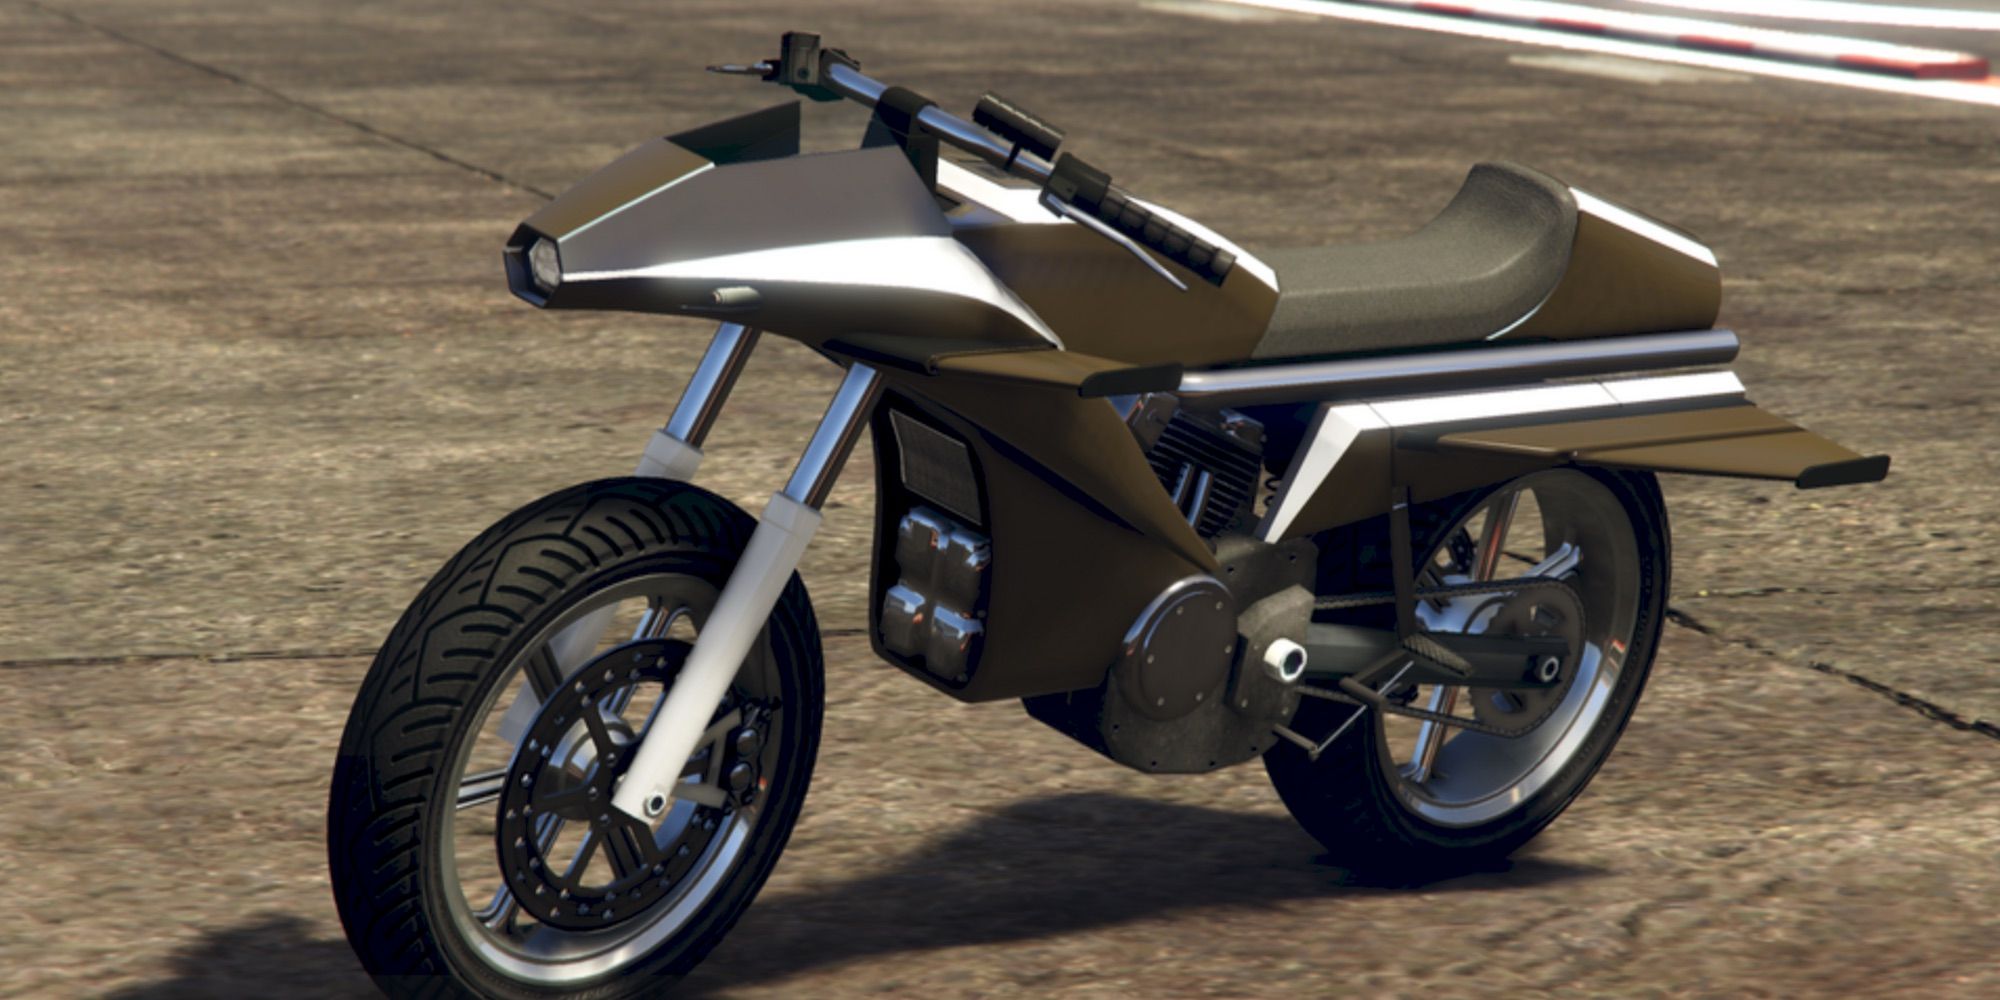 The Oppressor motorcycle from GTA Online